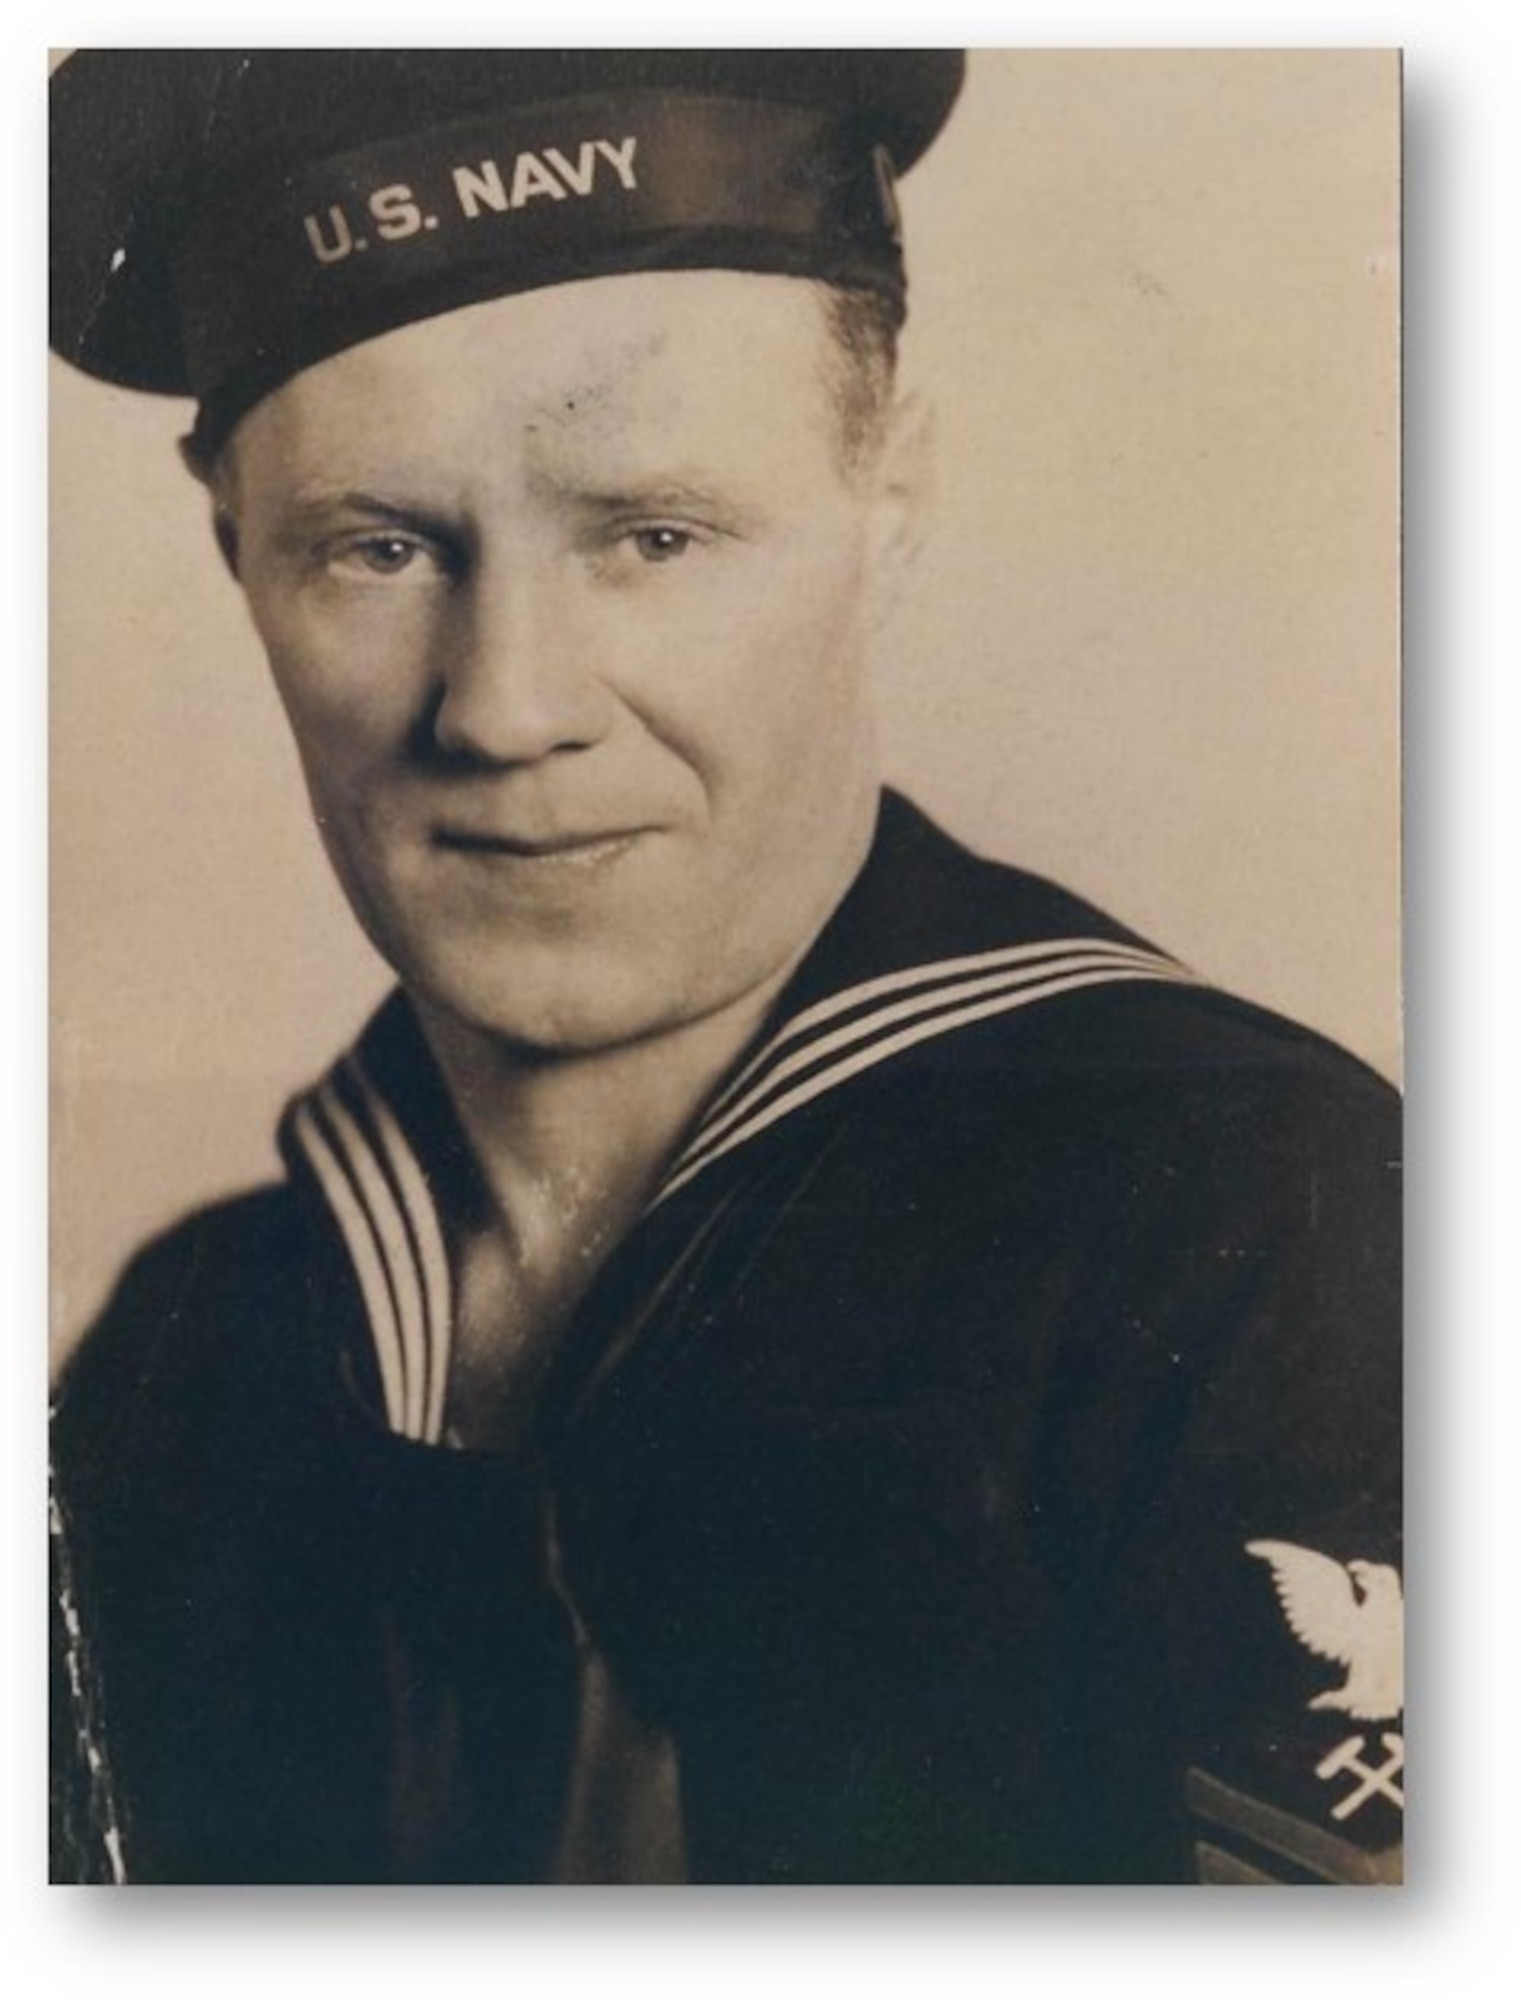 Henry Anderburg, maternal grandfather of John Moyes, the 28th Bomb Wing historian, served in the U.S. Navy as a Frogman during World War I. He was awarded a Bronze Star during his service. (Courtesy photo)